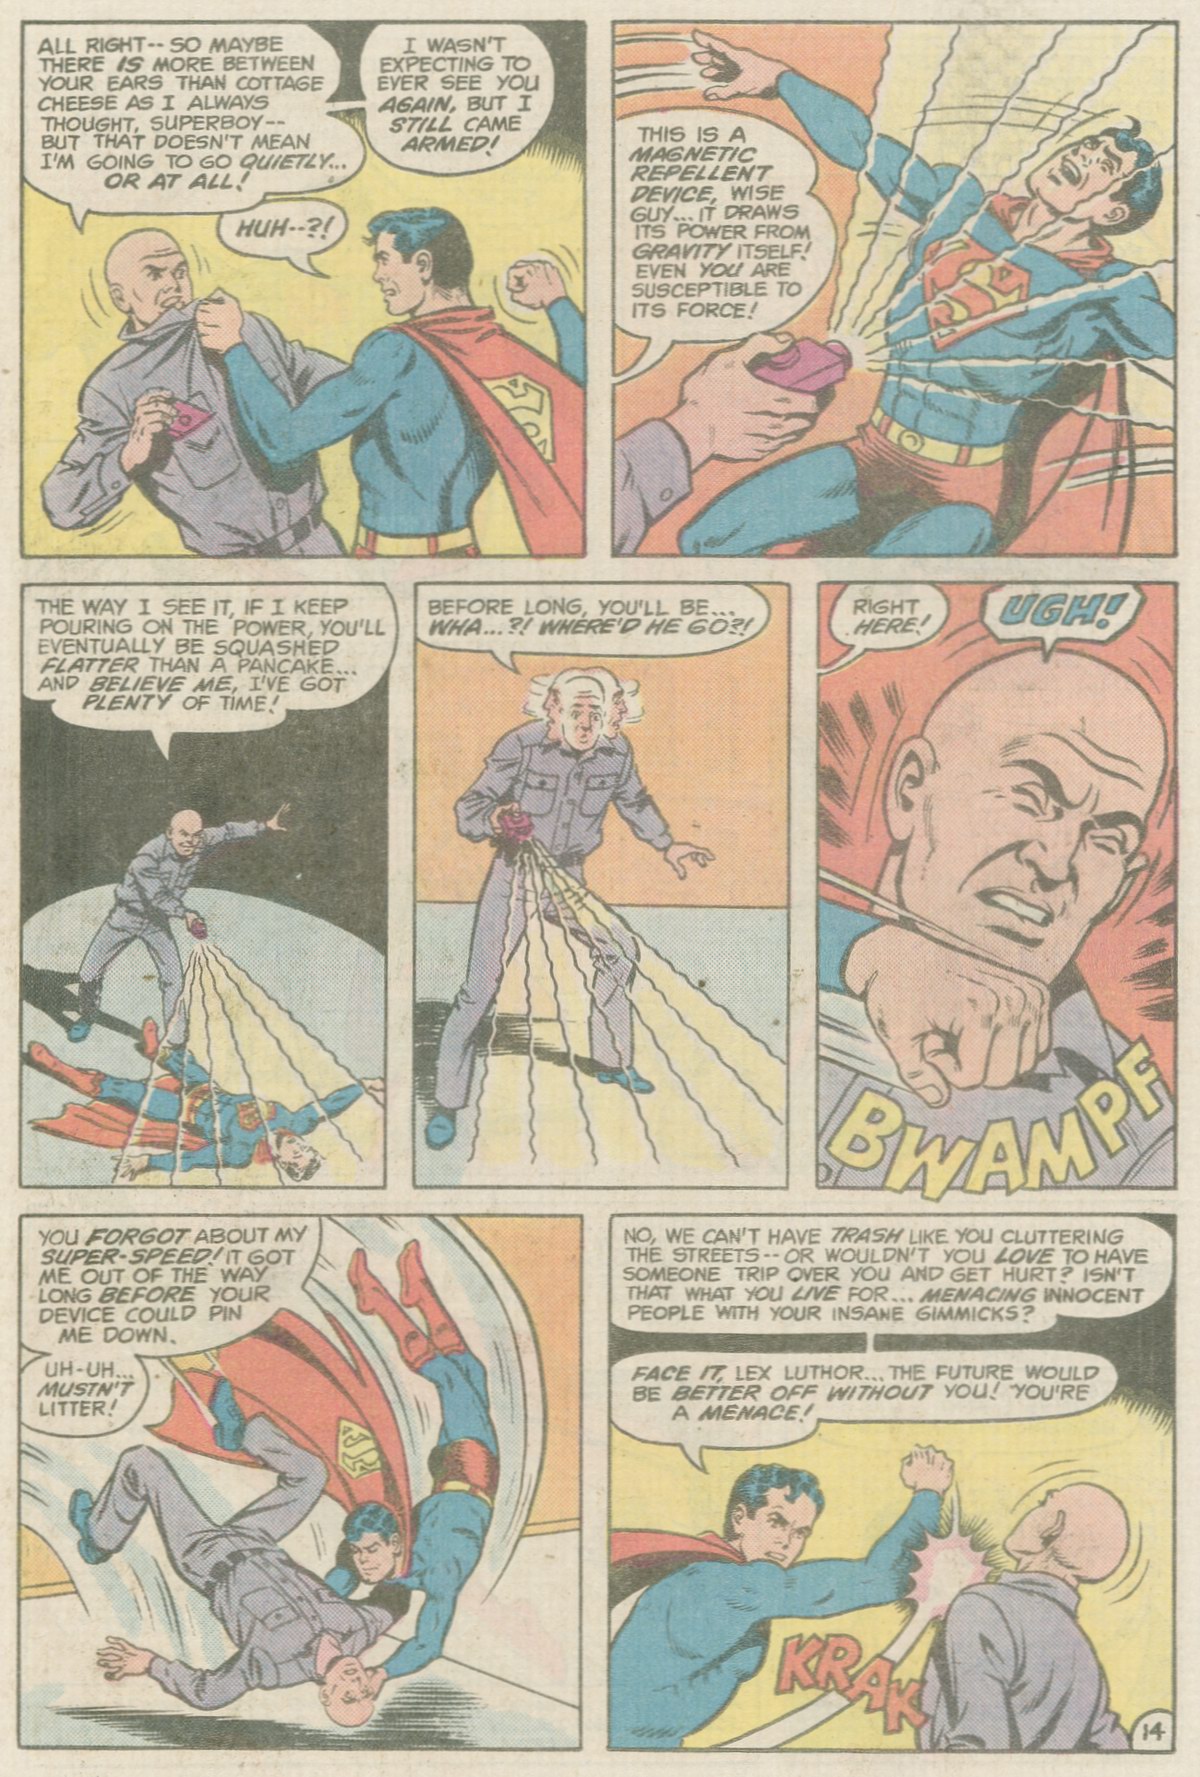 The New Adventures of Superboy 38 Page 14